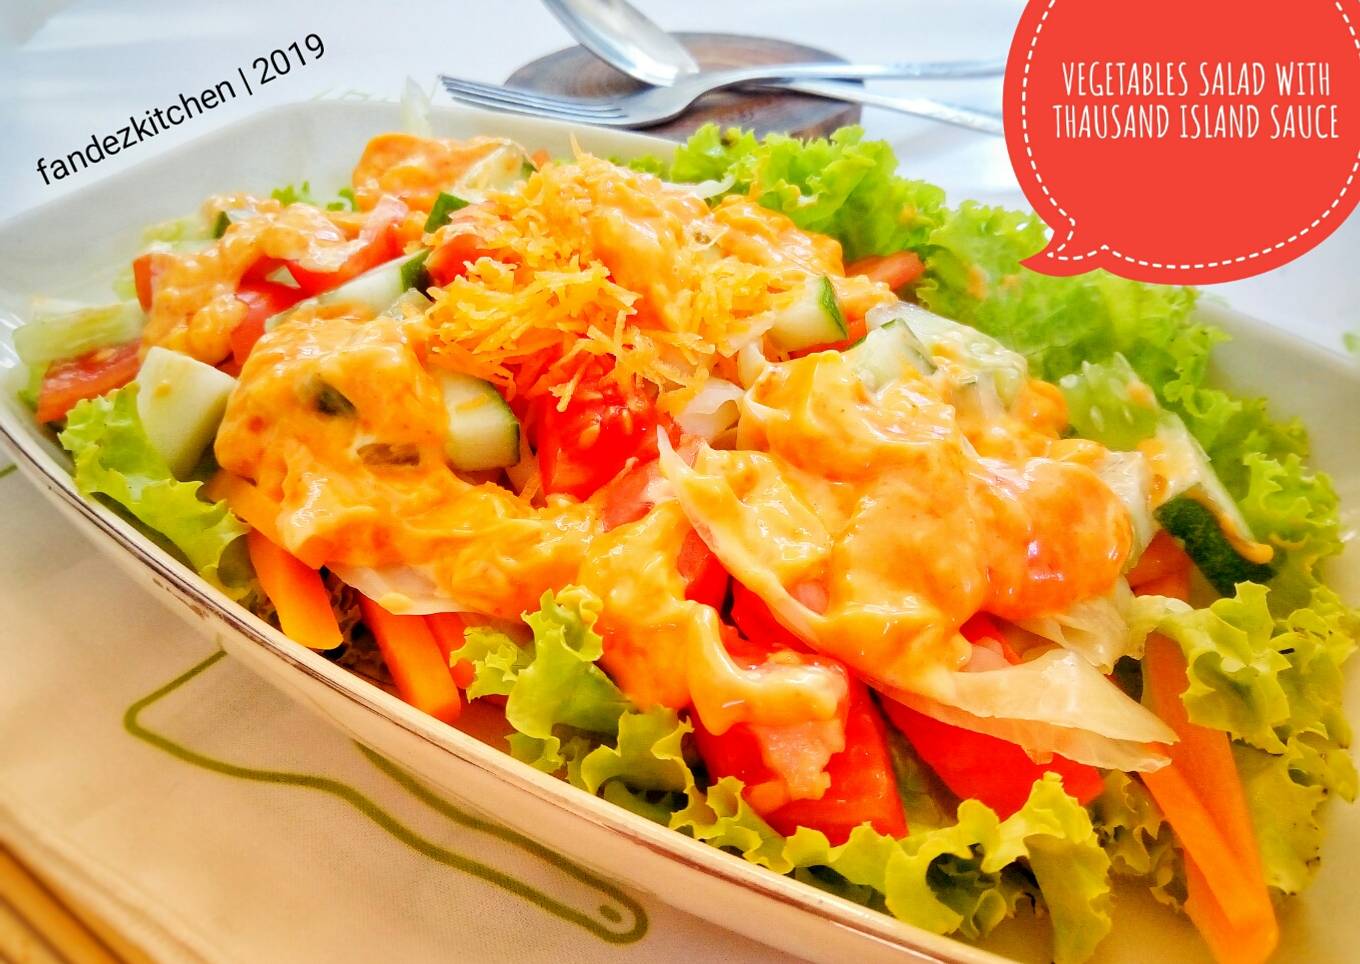 Vegetables salad with thausand island sauce